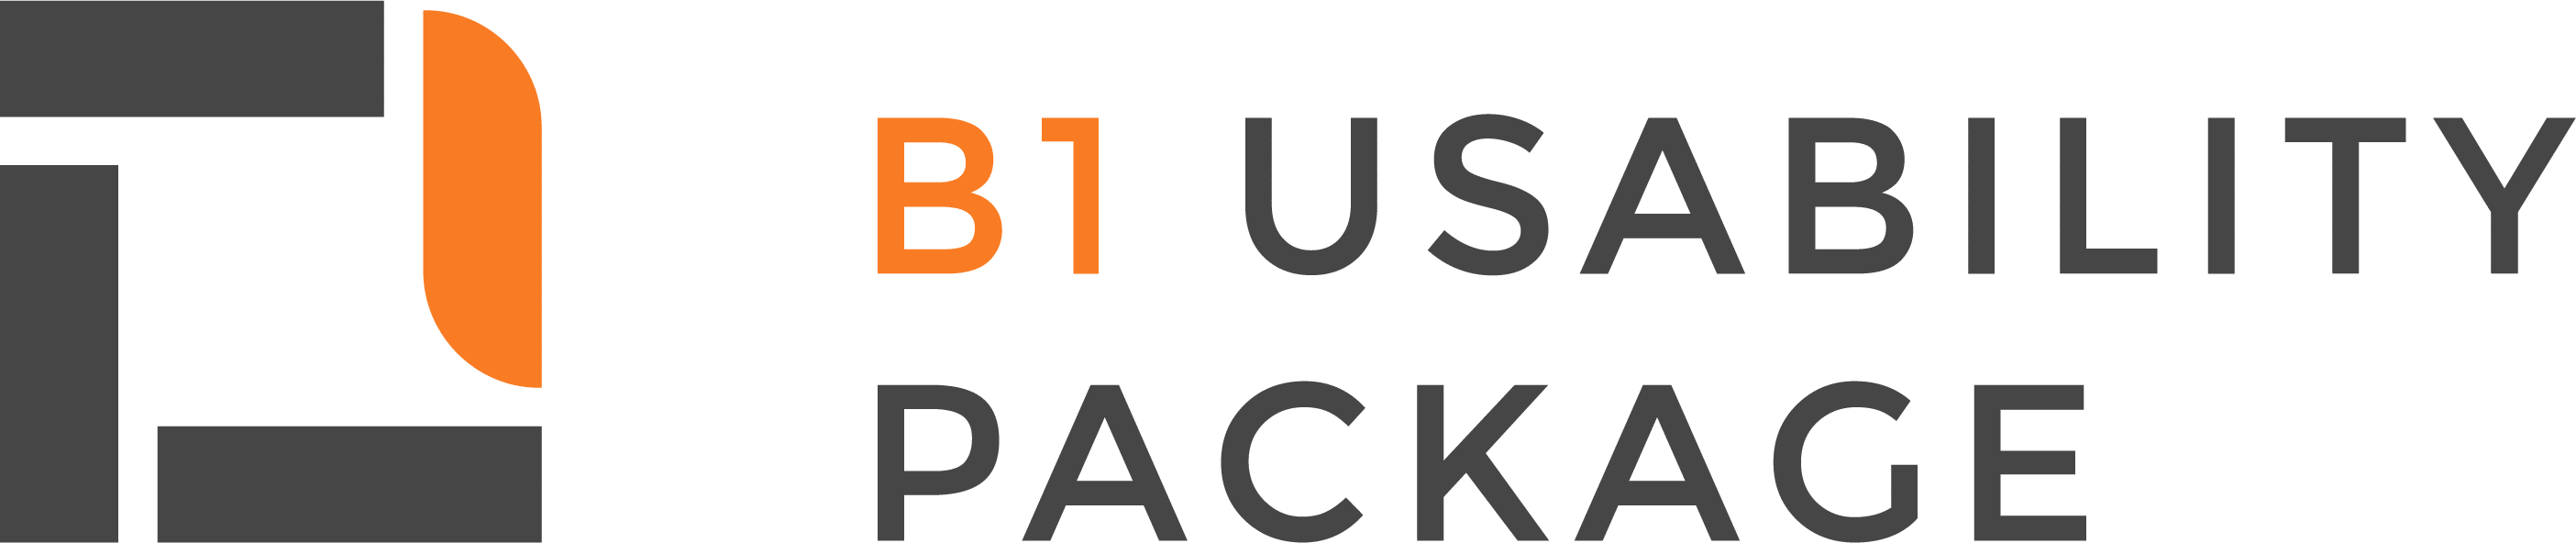 B1UP_B1 Usability Package